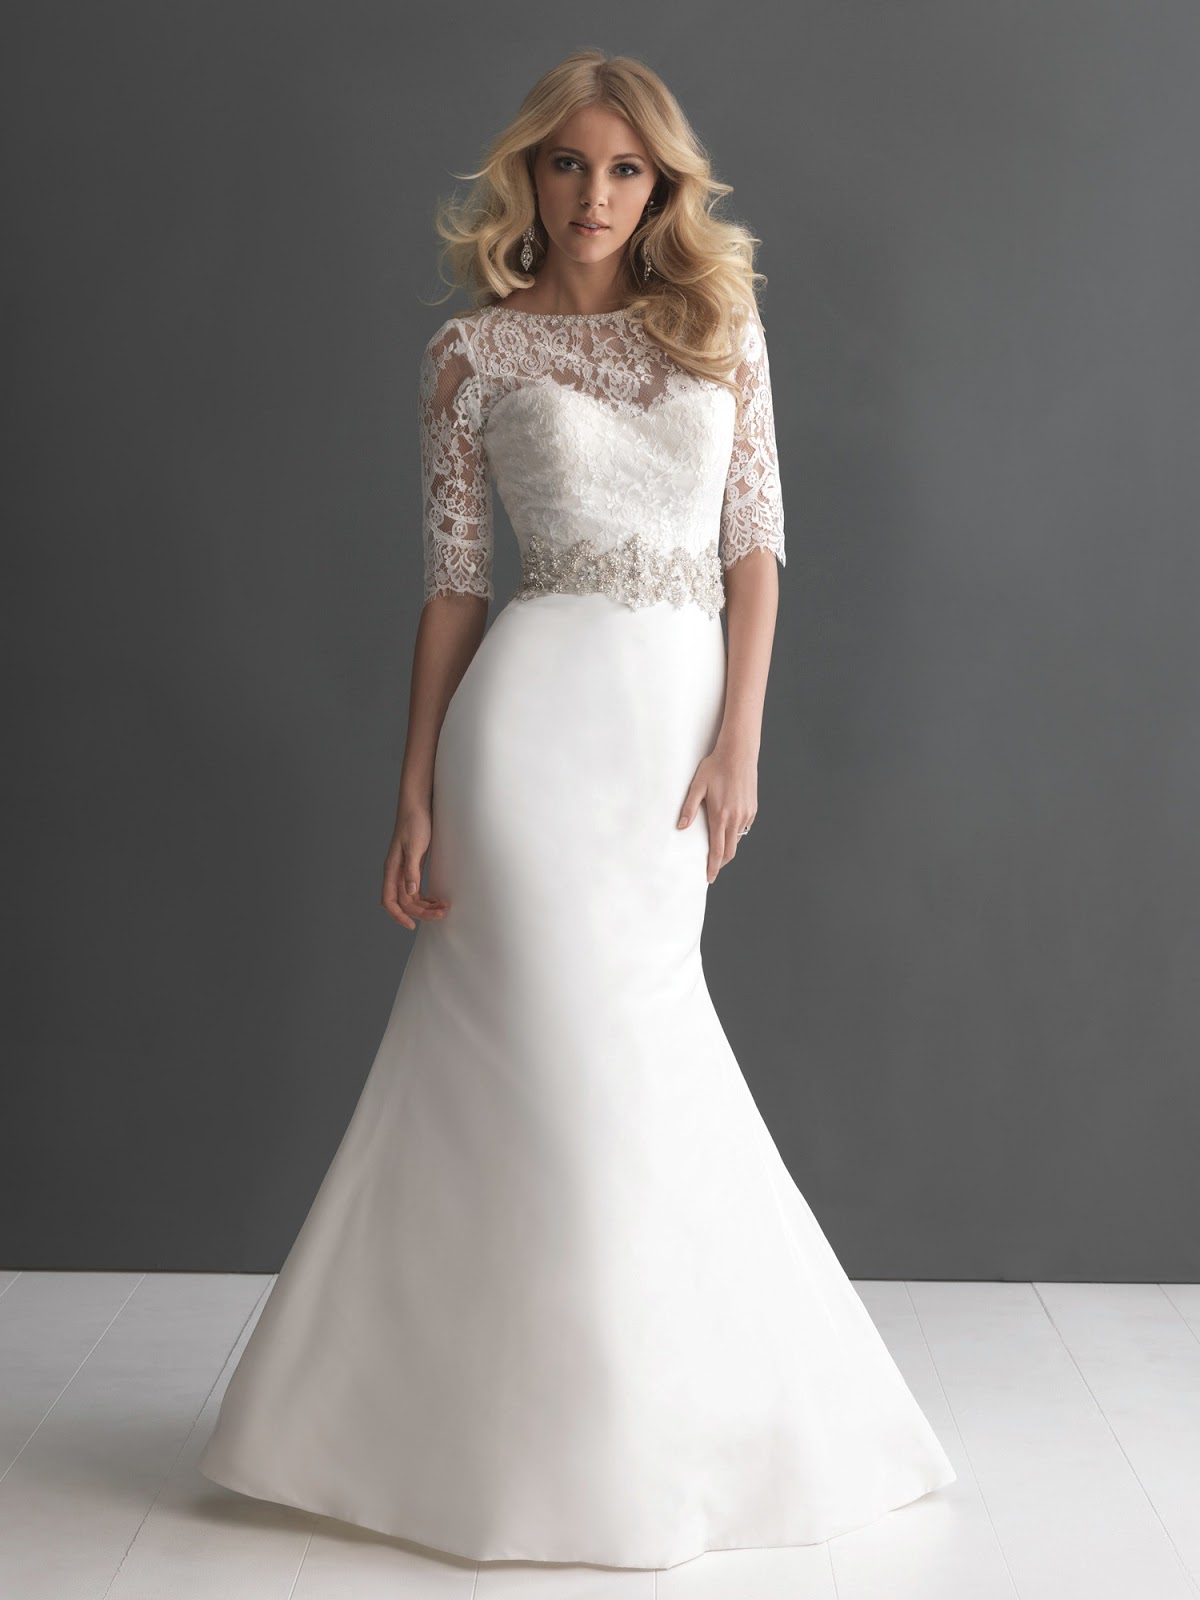 DressyBridal: Allure Wedding Dresses Fall 2013 Collection